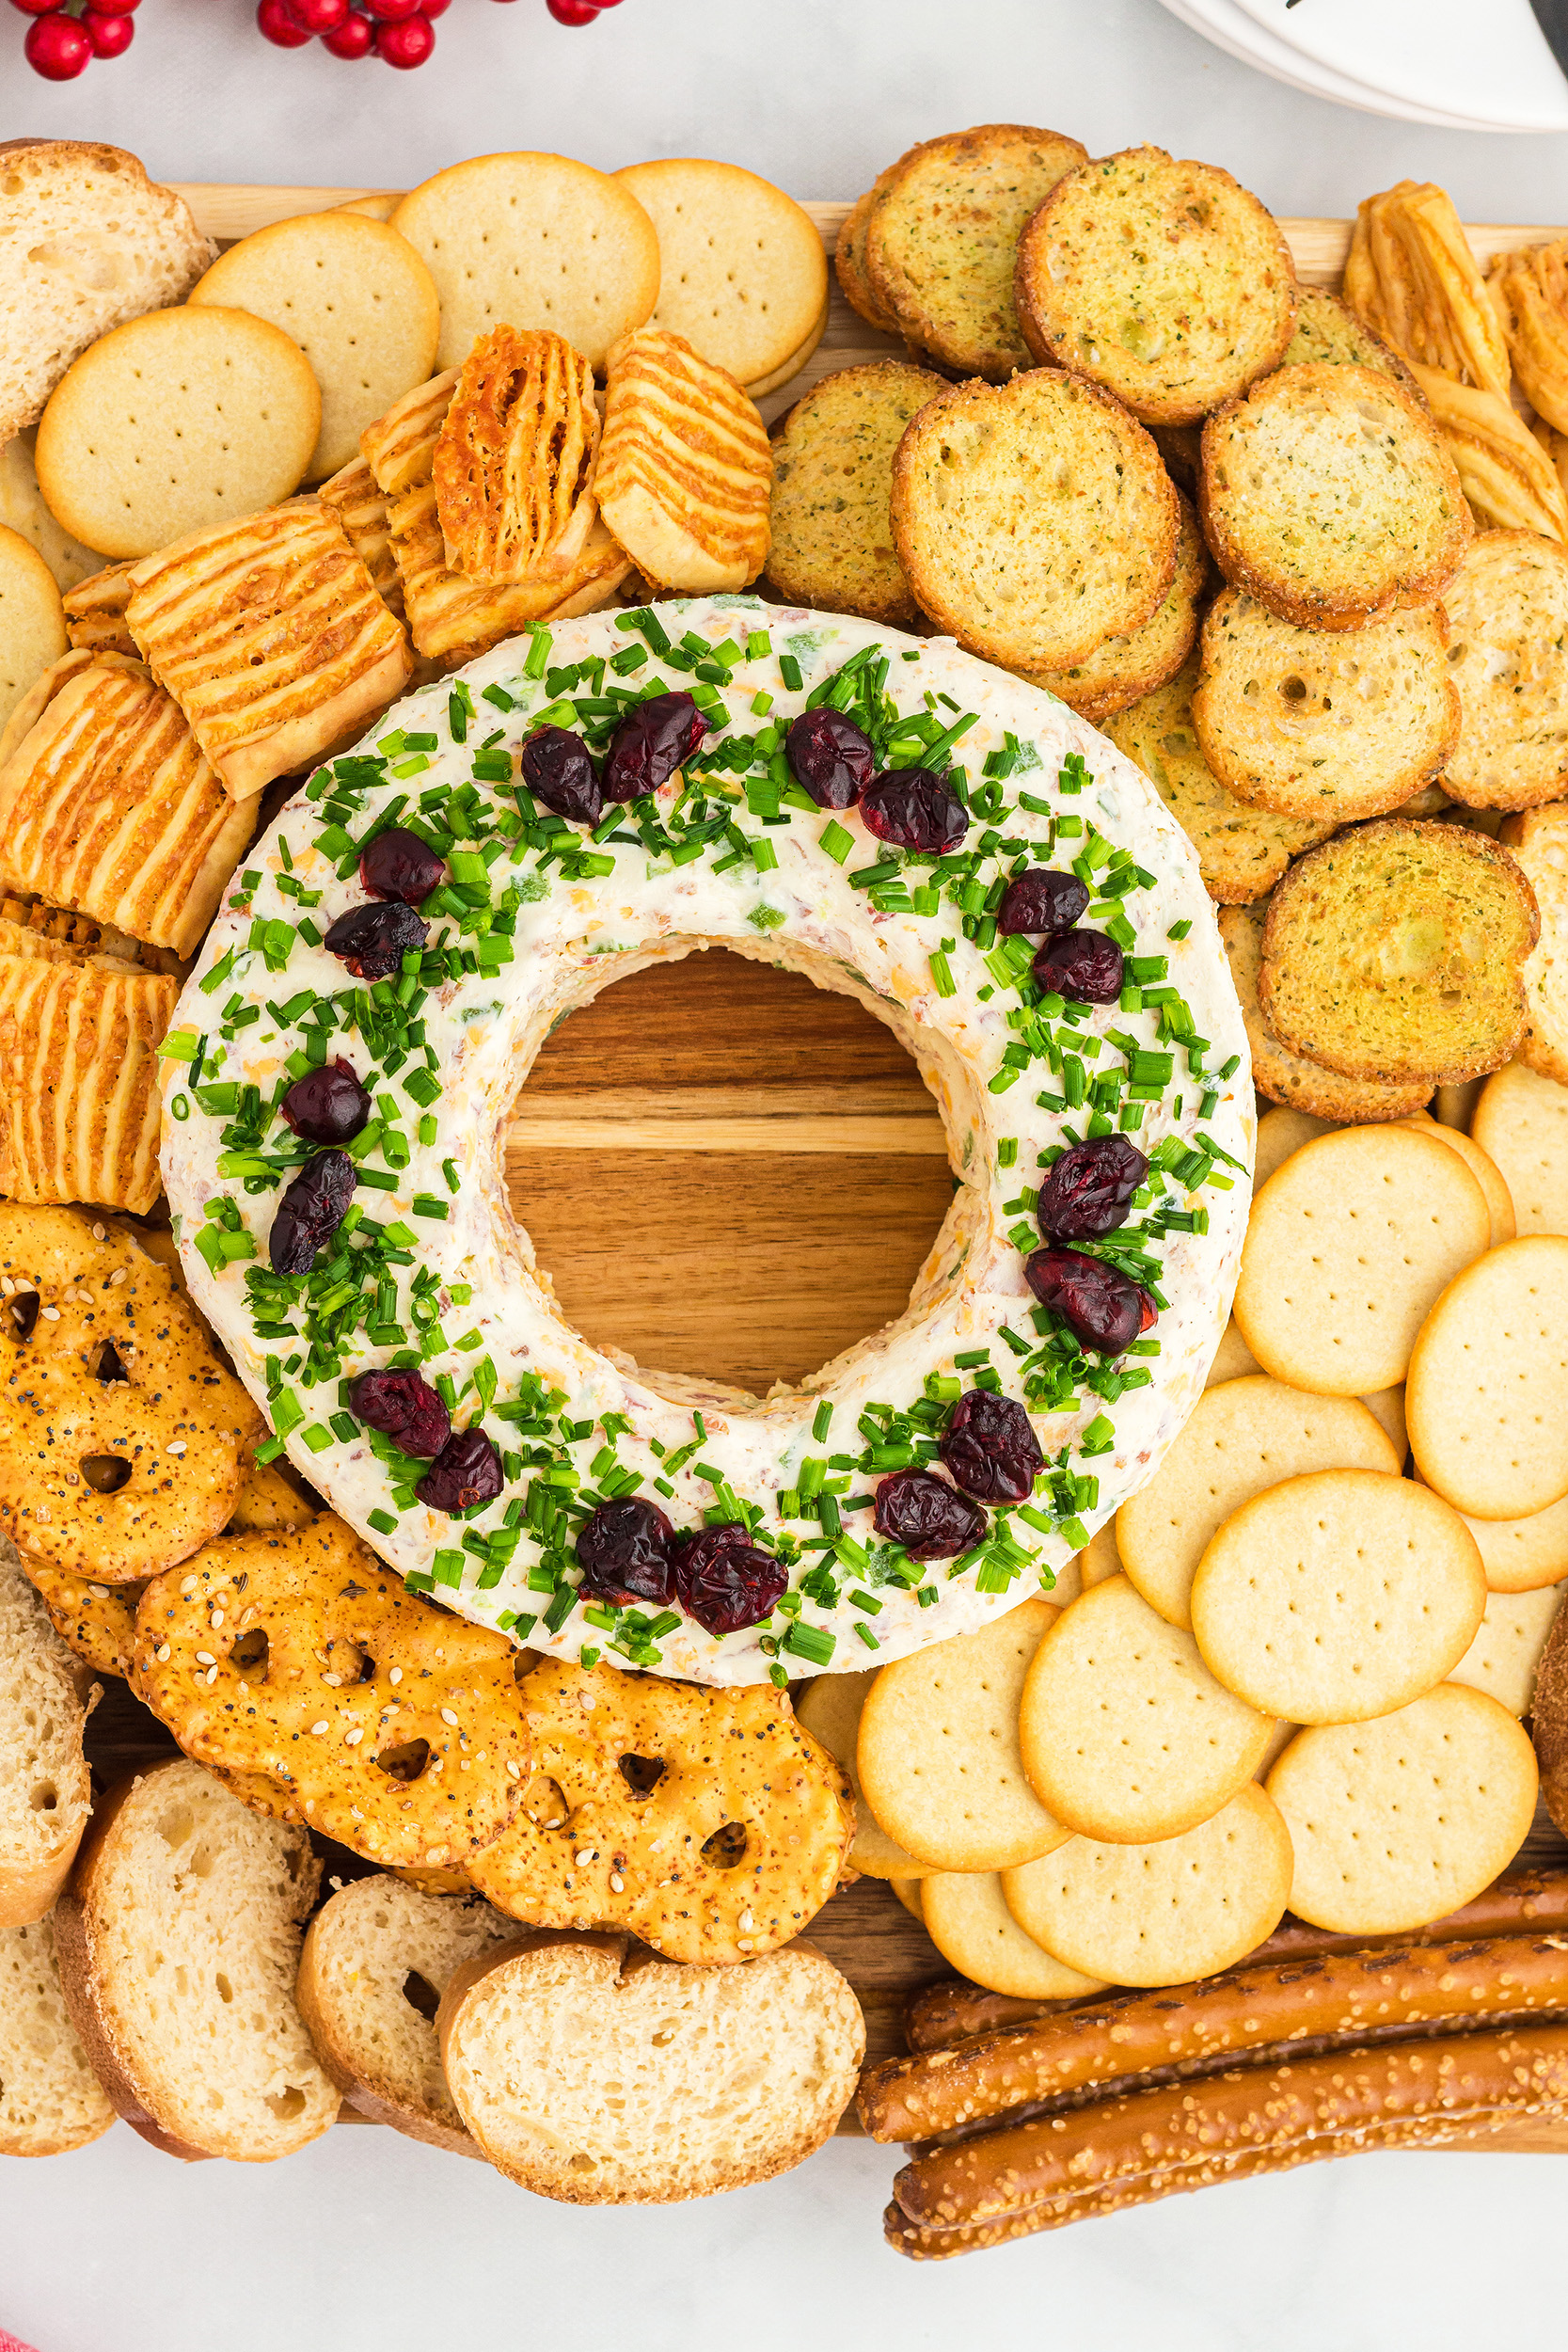 large wooden board with a cheese ball wreath in the center surrounded by crackers